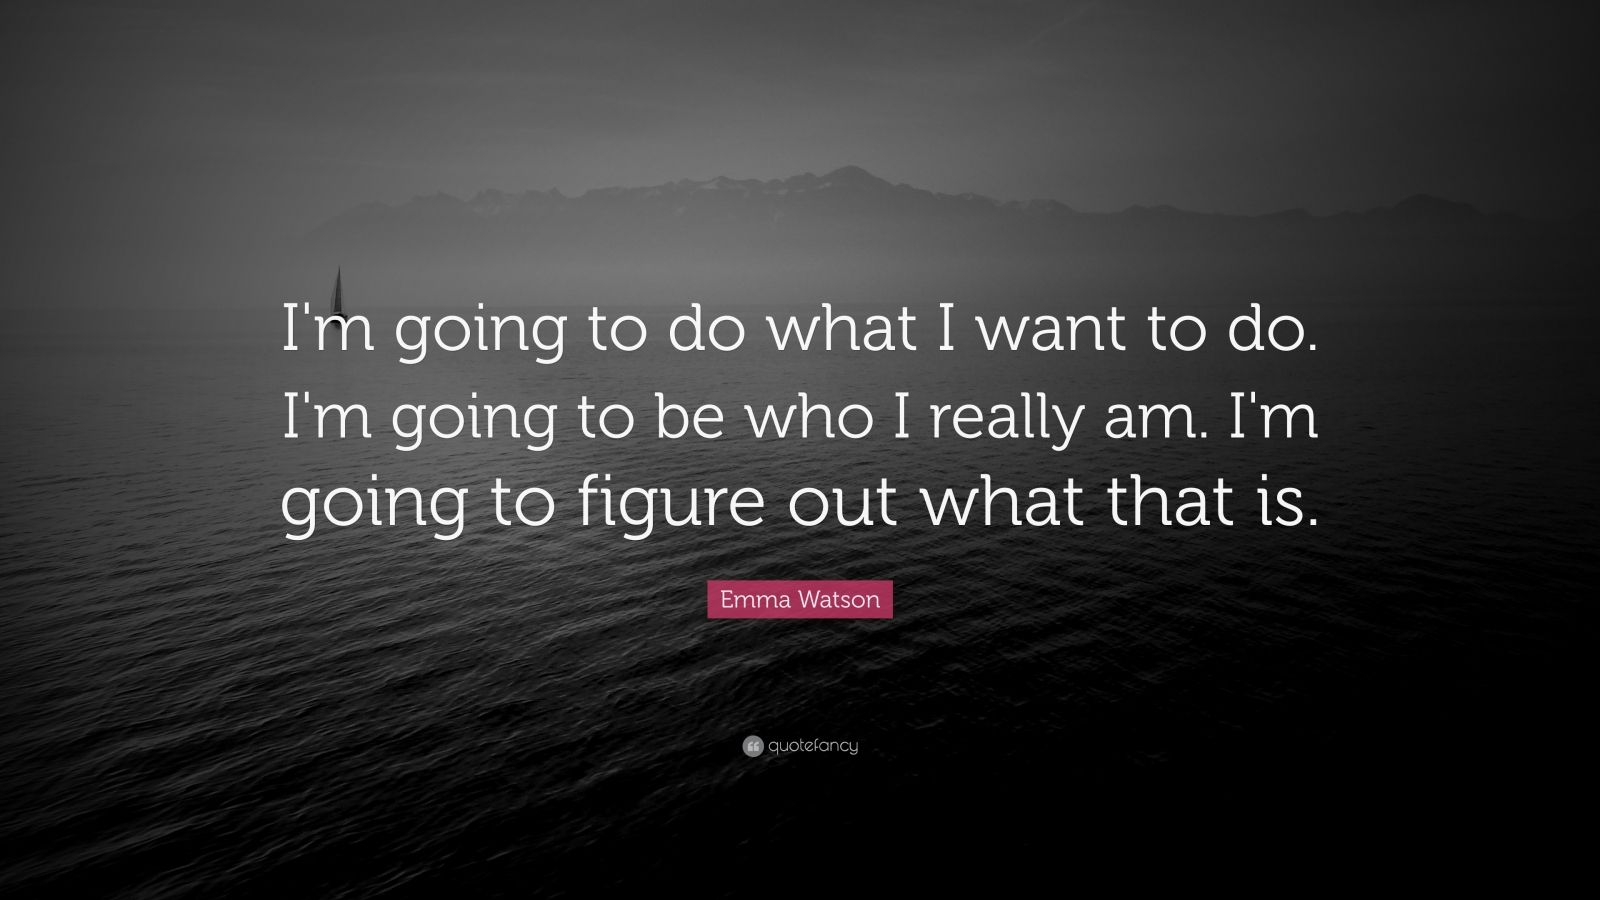 Emma Watson Quote “I'm going to do what I want to do. I'm